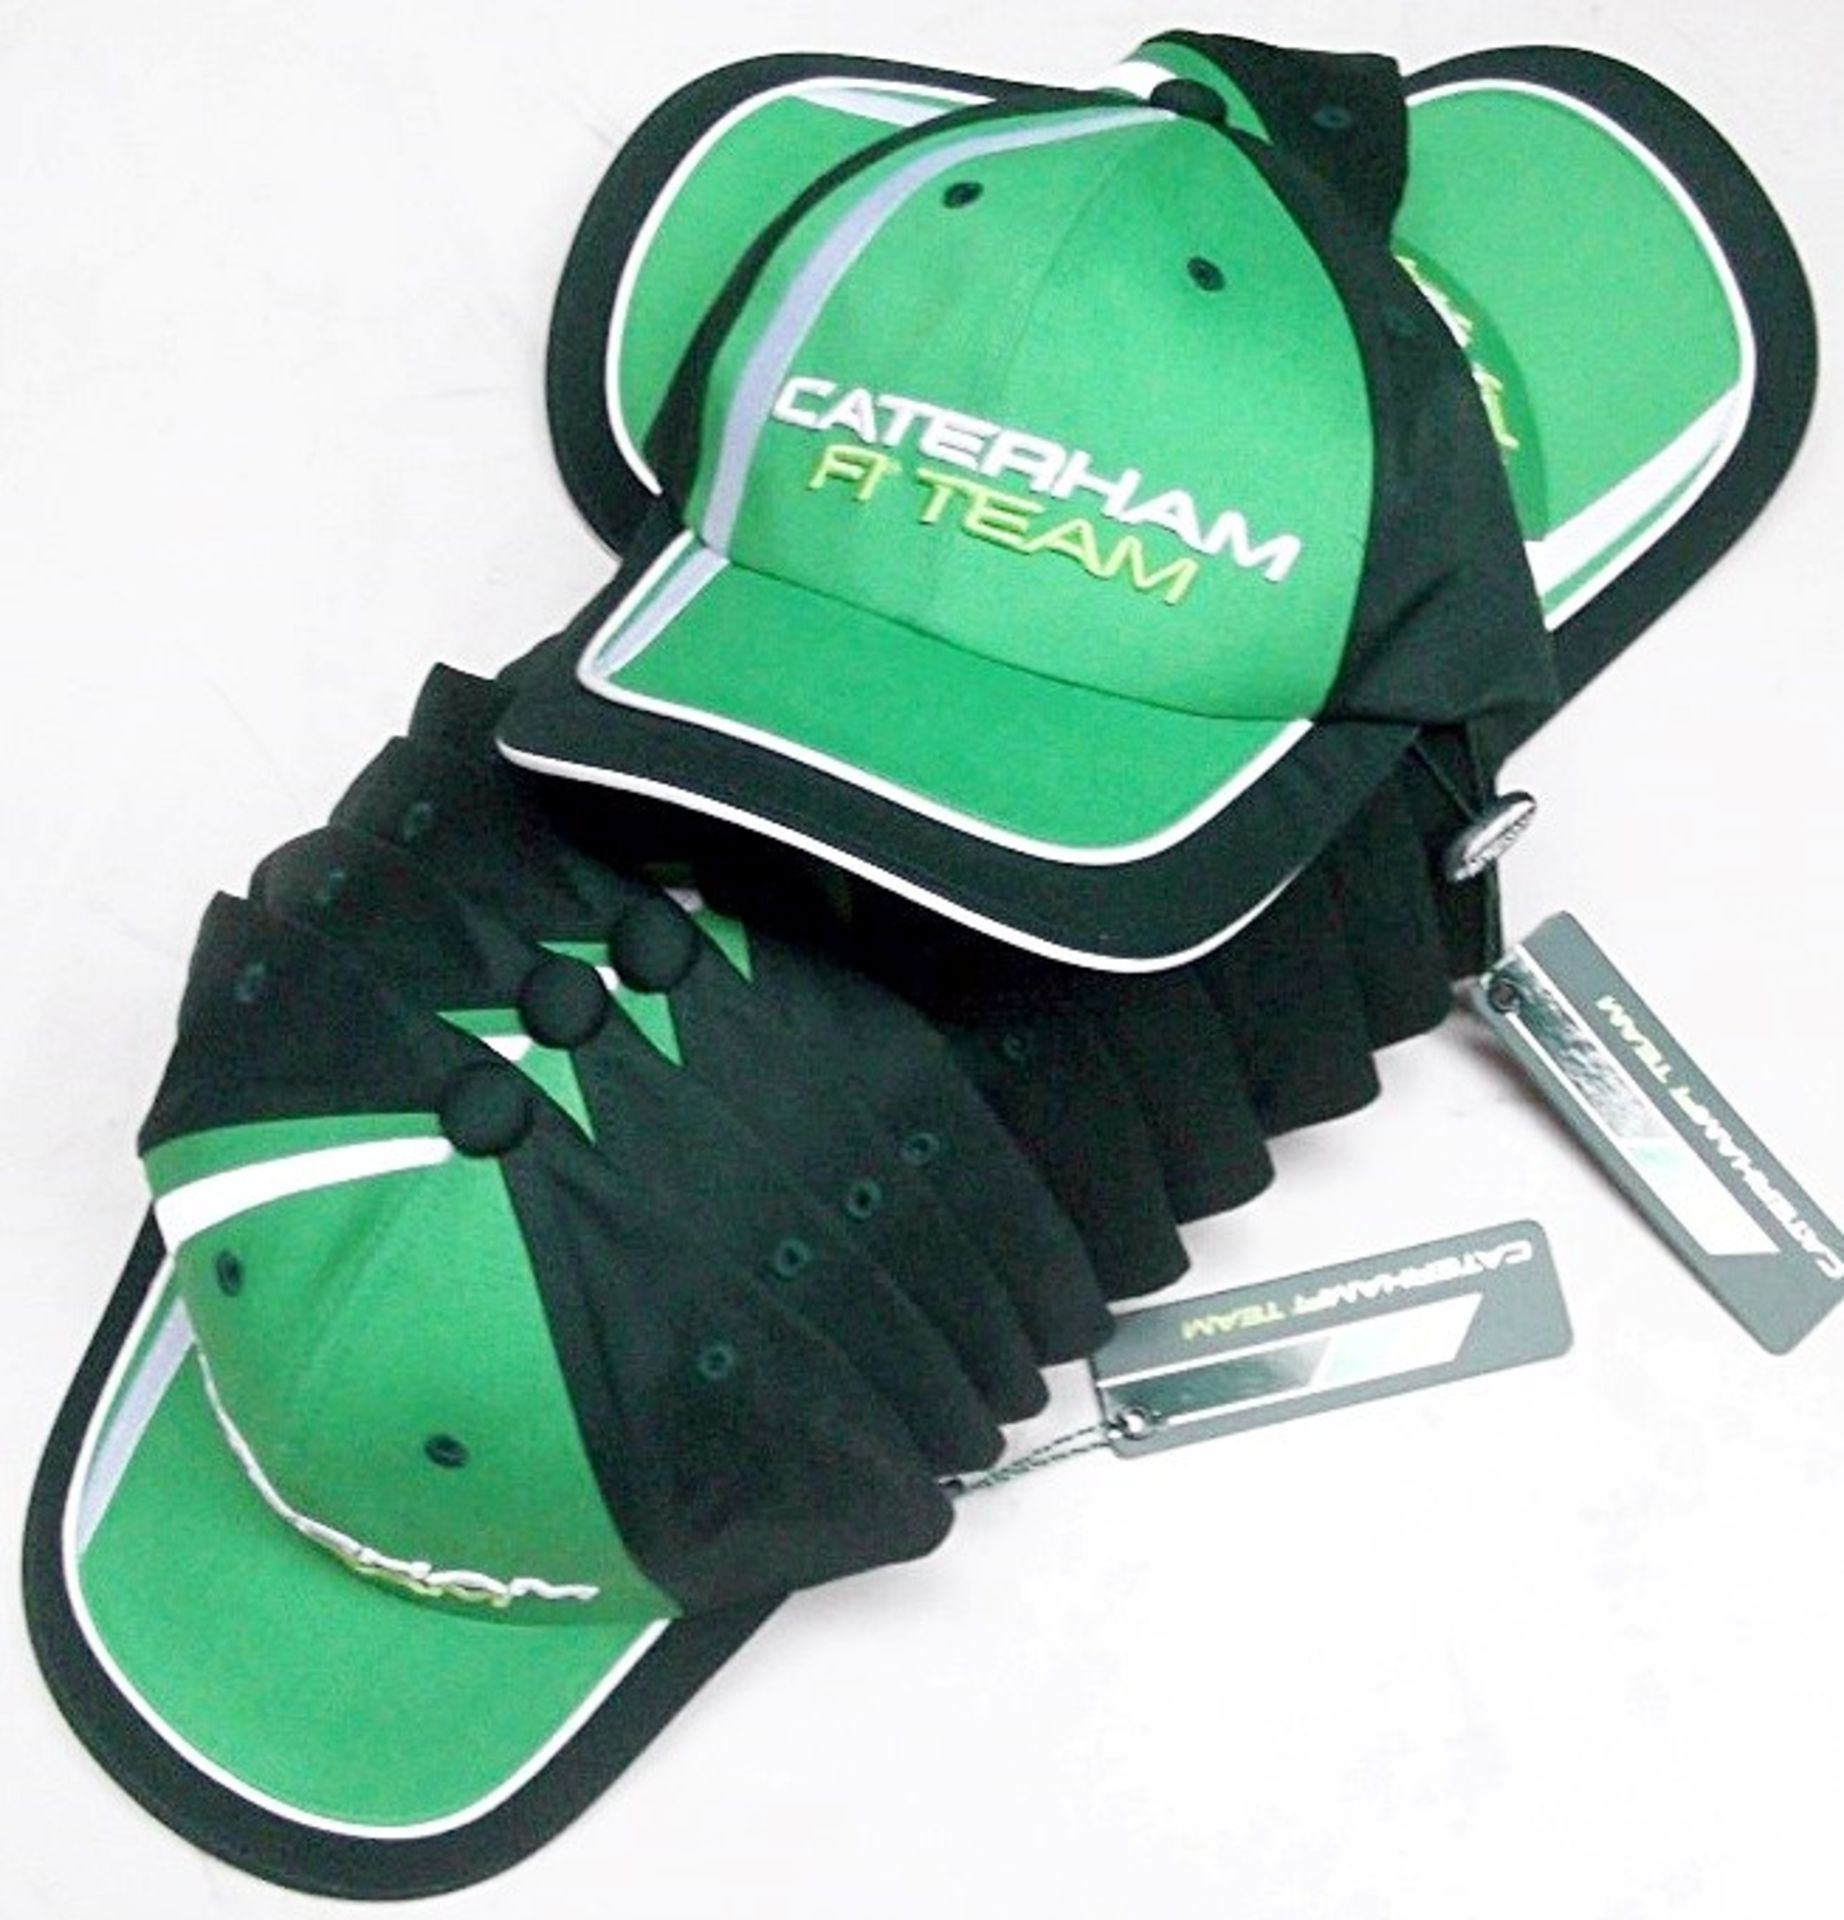 12 x CATERHAM F1 Team Caps - CL155 - Ref: JIM078 - Location: Altrincham WA14 - NEW with TAGS  We - Image 2 of 6